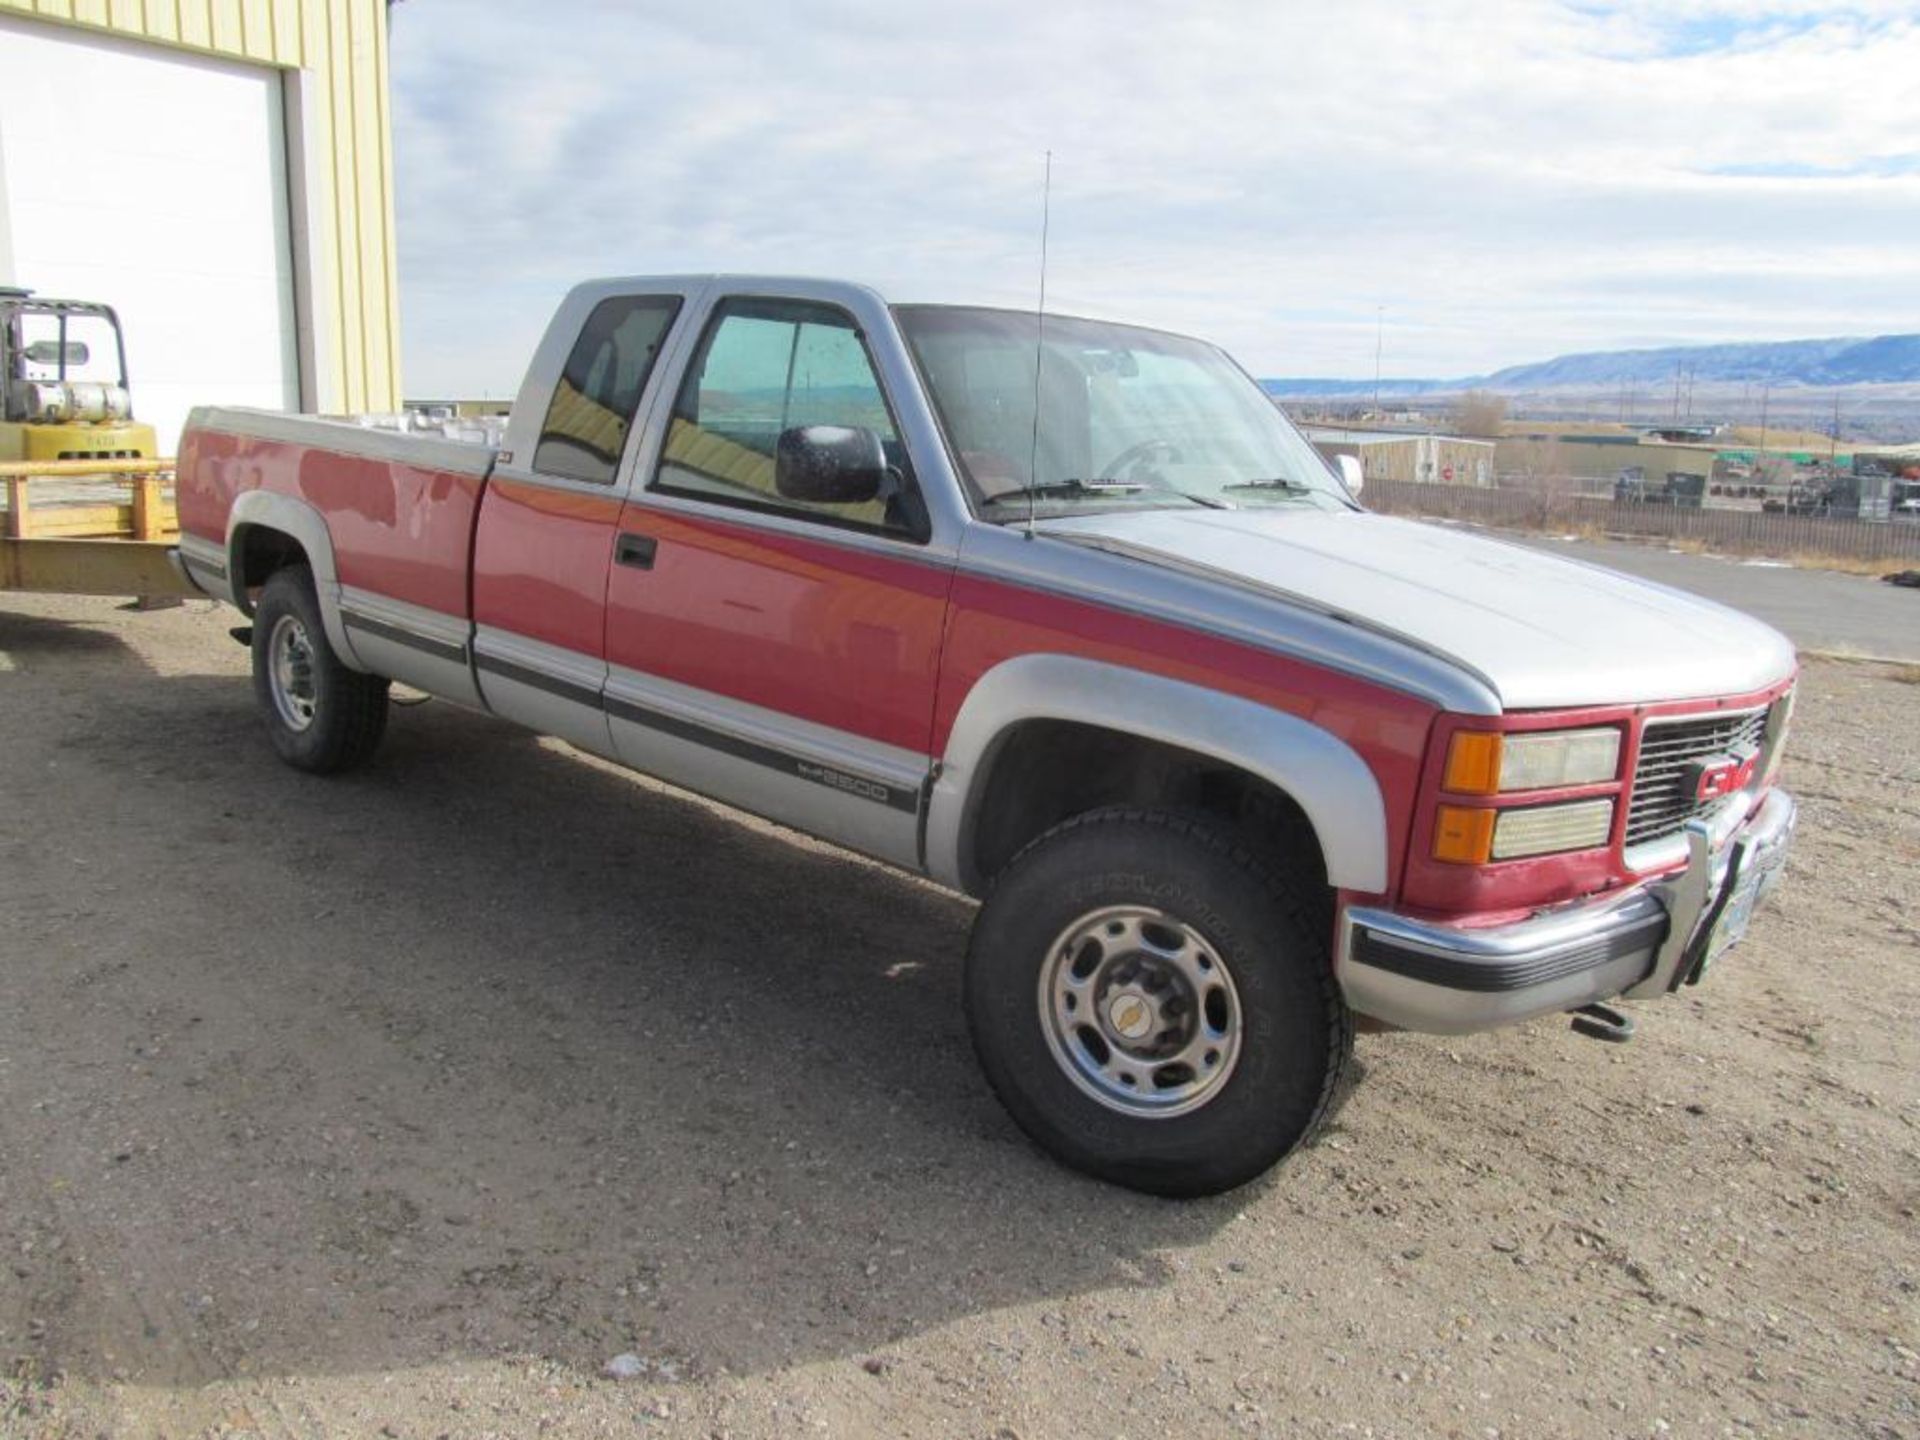 GMC Sierra 2500 SLE 4x4 Pick Up Truck, VIN: 1GTGK29N3RE554877 (New 1994), with Extended Cab, Automat - Image 2 of 6